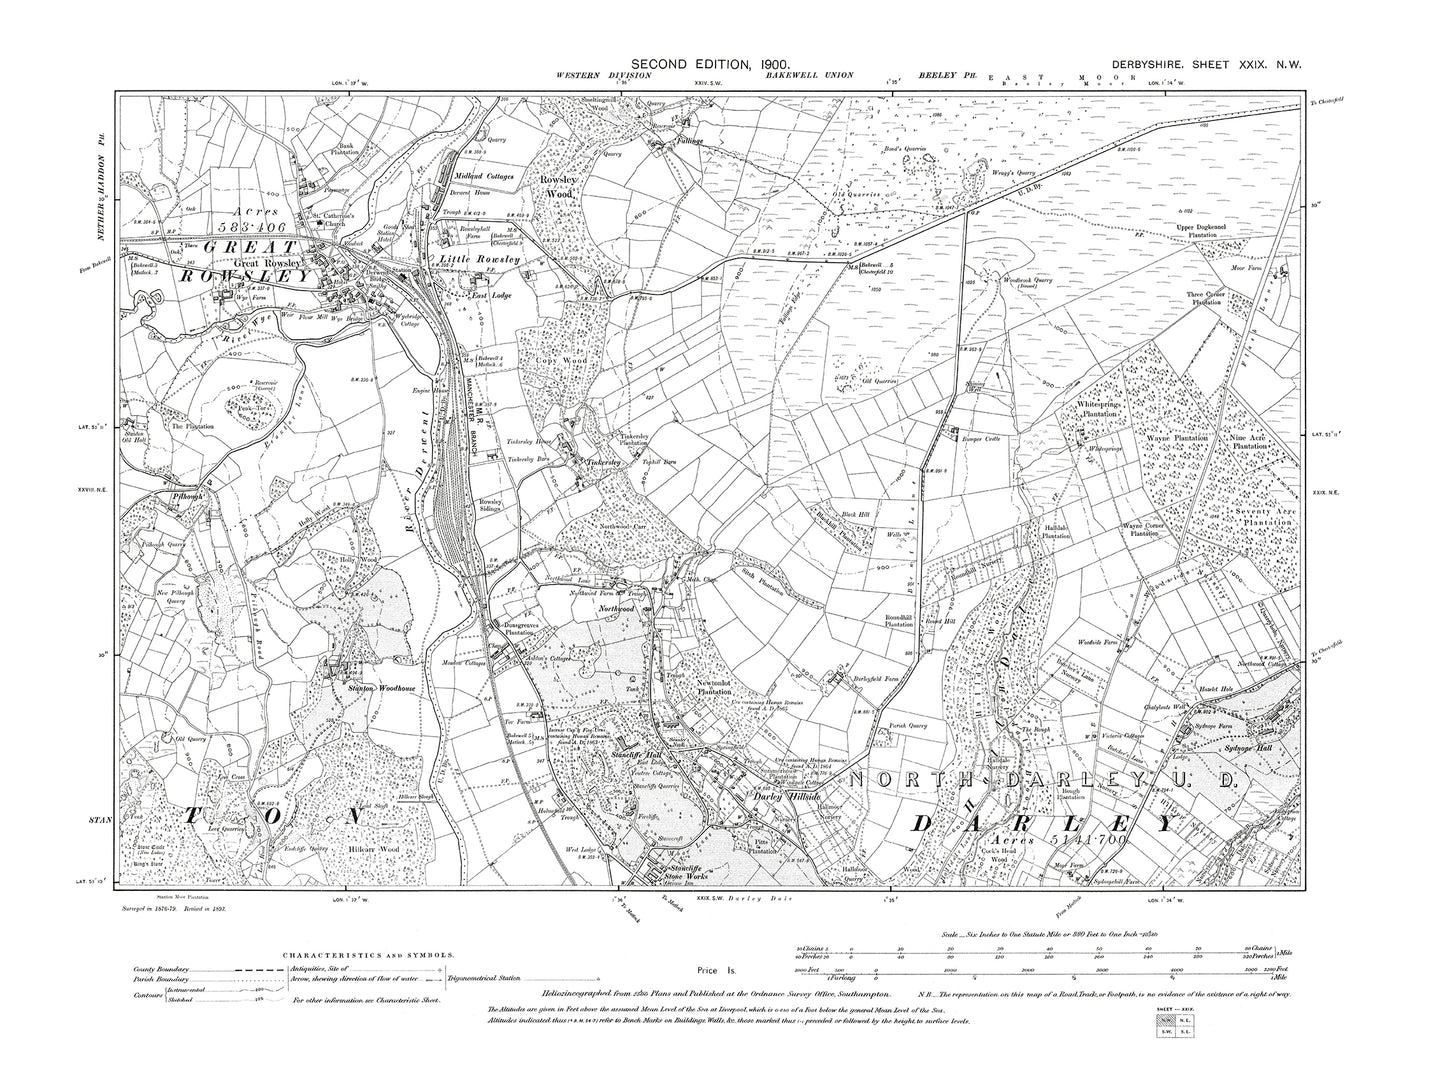 Old OS map dated 1900, showing Great Rowsley, Darley Dale (north) in Derbyshire 29NW